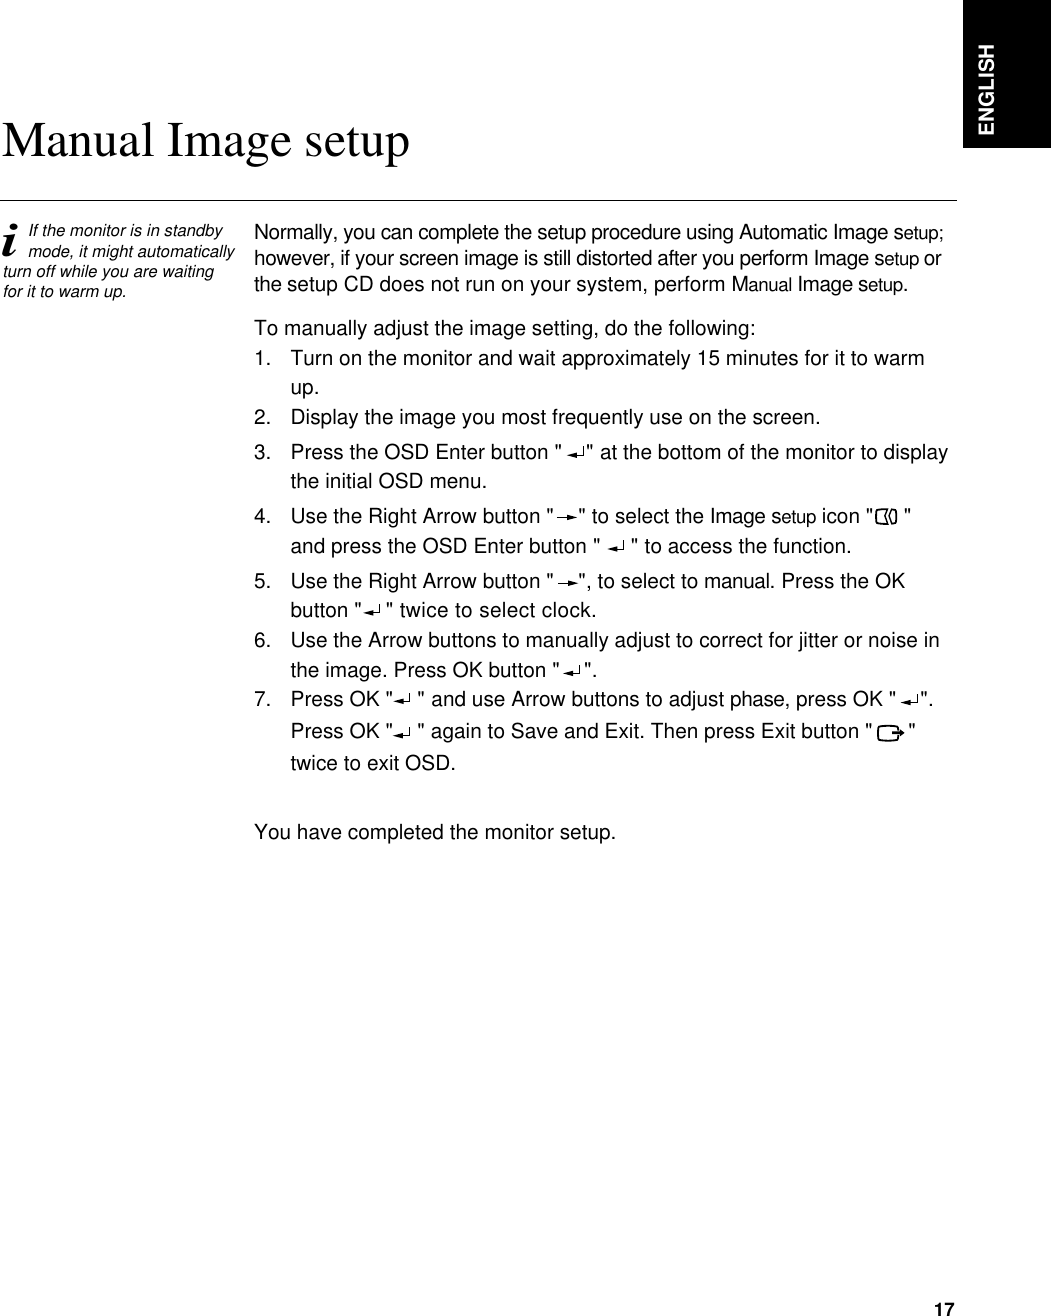 Normally, you can complete the setup procedure using Automatic Image setup;however, if your screen image is still distorted after you perform Image setup orthe setup CD does not run on your system, perform Manual Image setup.To manually adjust the image setting, do the following:1.  Turn on the monitor and wait approximately 15 minutes for it to warm up.2. Display the image you most frequently use on the screen.3.  Press the OSD Enter button &quot;  &quot; at the bottom of the monitor to displaythe initial OSD menu.4.  Use the Right Arrow button &quot; &quot; to select the Image setup icon &quot; &quot;and press the OSD Enter button &quot;  &quot; to access the function.5.  Use the Right Arrow button &quot; &quot;, to select to manual. Press the OKbutton &quot;  &quot; twice to select clock.6.  Use the Arrow buttons to manually adjust to correct for jitter or noise in the image. Press OK button &quot; &quot;.  7.  Press OK &quot; &quot; and use Arrow buttons to adjust phase, press OK &quot;  &quot;.     Press OK &quot; &quot; again to Save and Exit. Then press Exit button &quot;    &quot;twice to exit OSD.You have completed the monitor setup.ENGLISH17iIf the monitor is in standbymode, it might automaticallyturn off while you are waitingfor it to warm up.Manual Image setup